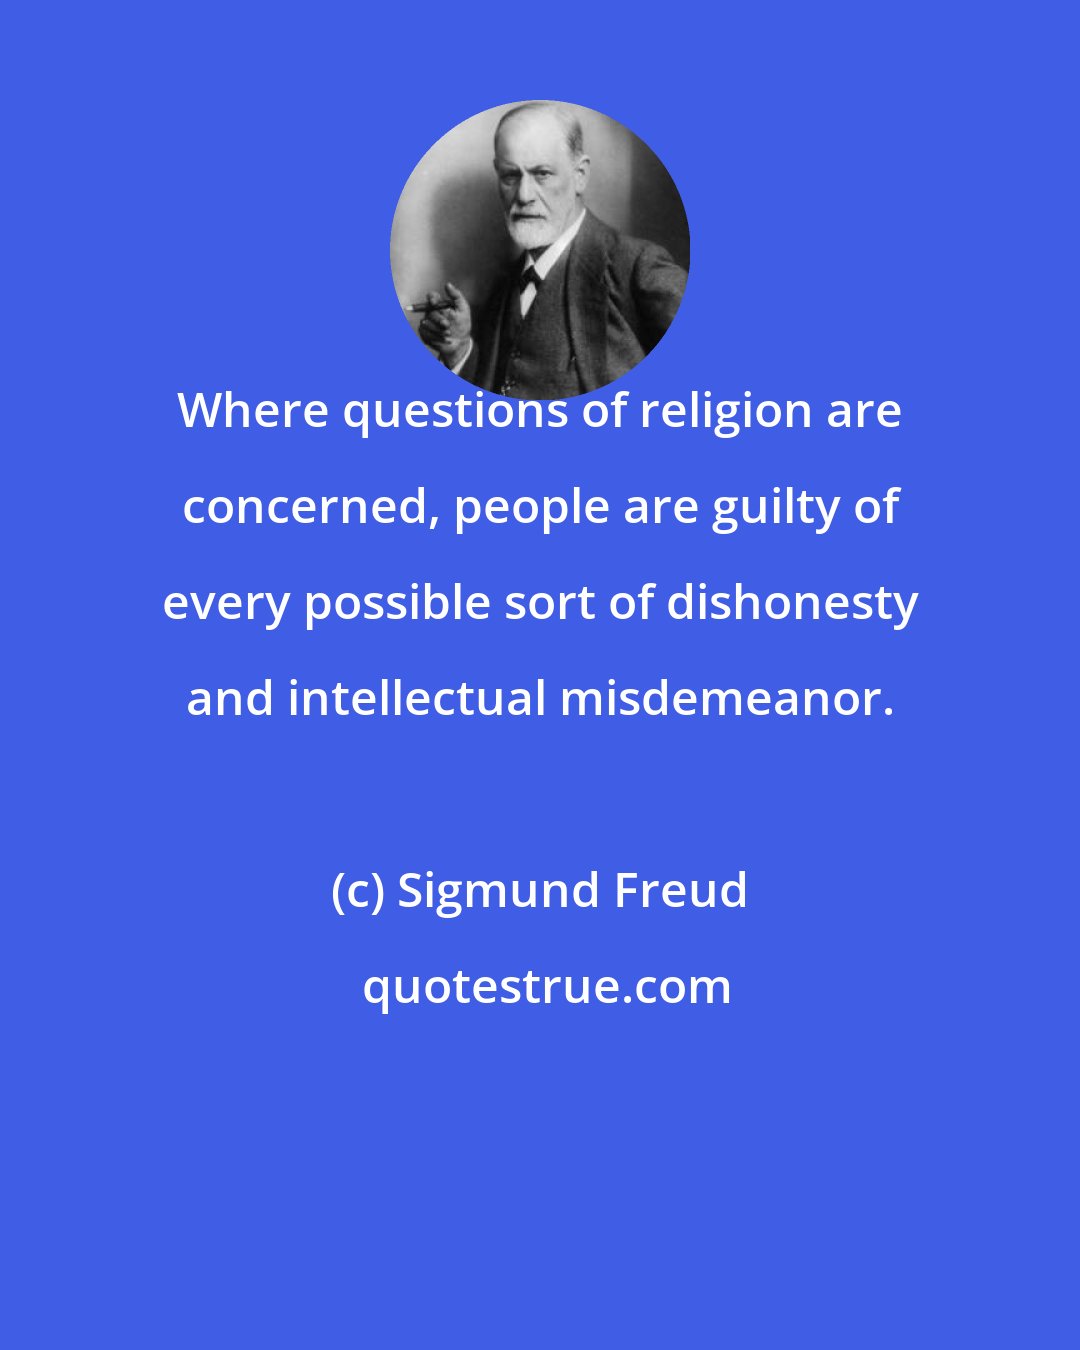 Sigmund Freud: Where questions of religion are concerned, people are guilty of every possible sort of dishonesty and intellectual misdemeanor.